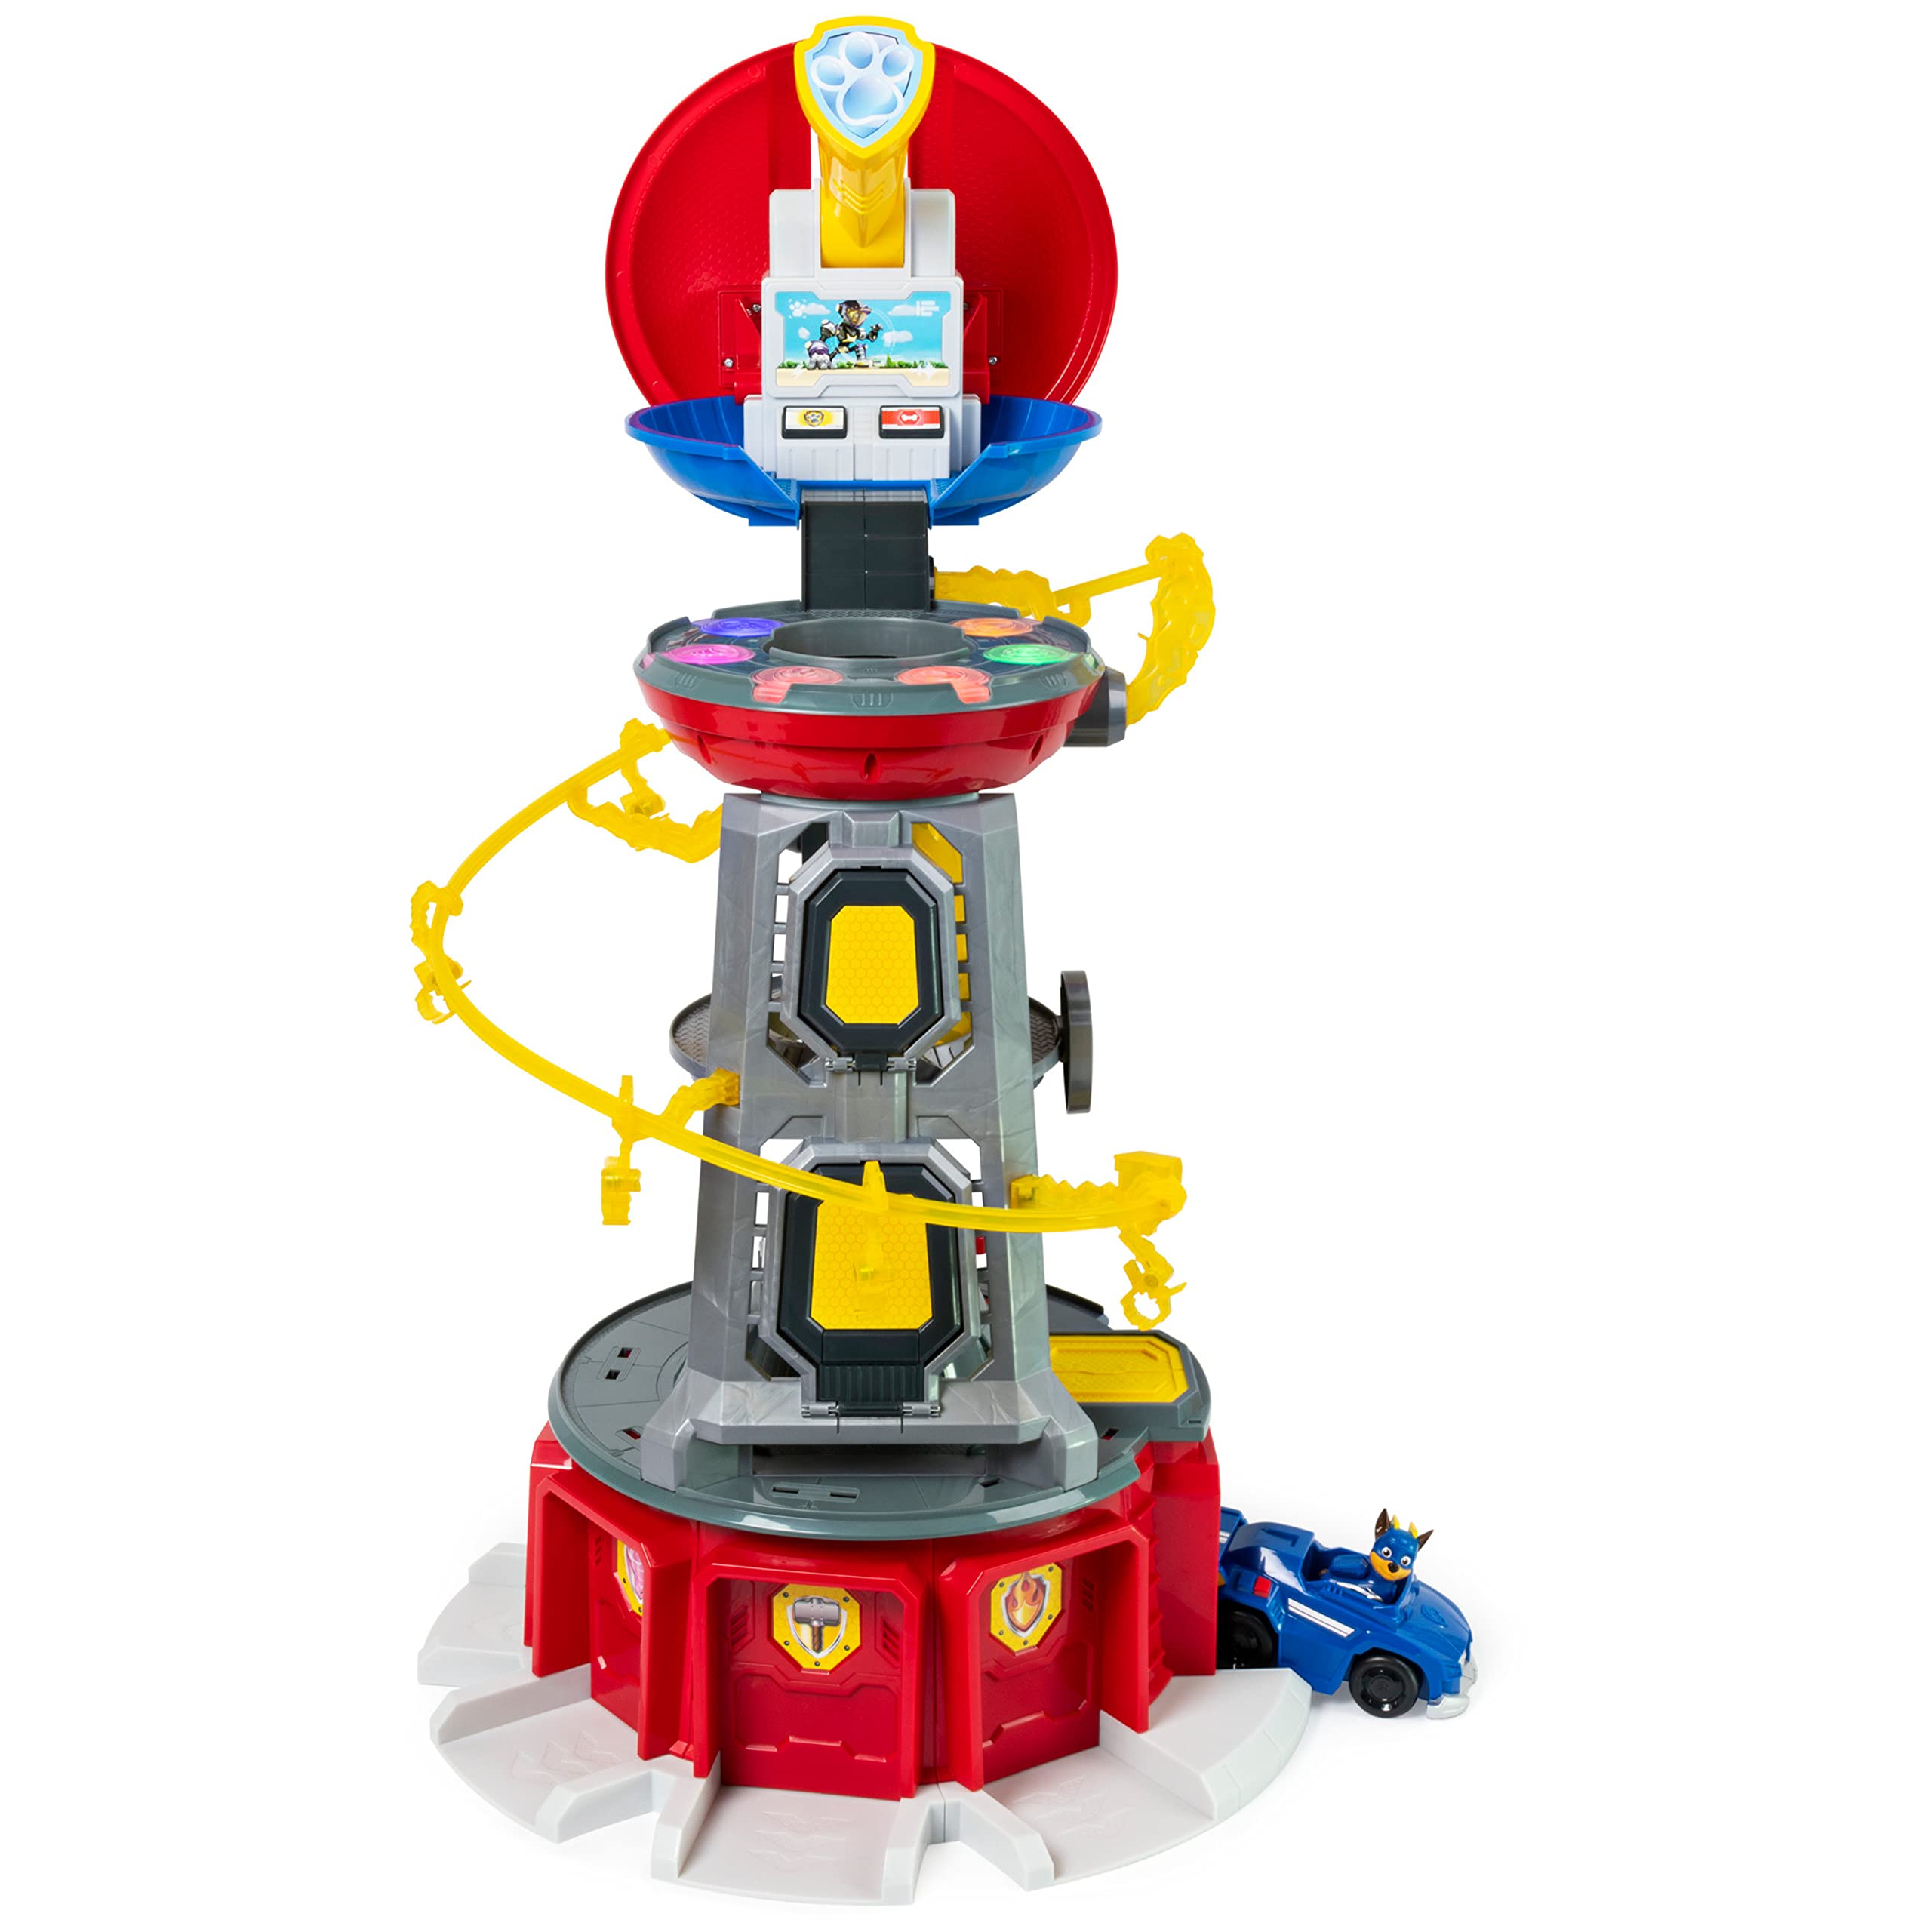 Paw patrol mighty pups lookout tower playset toys